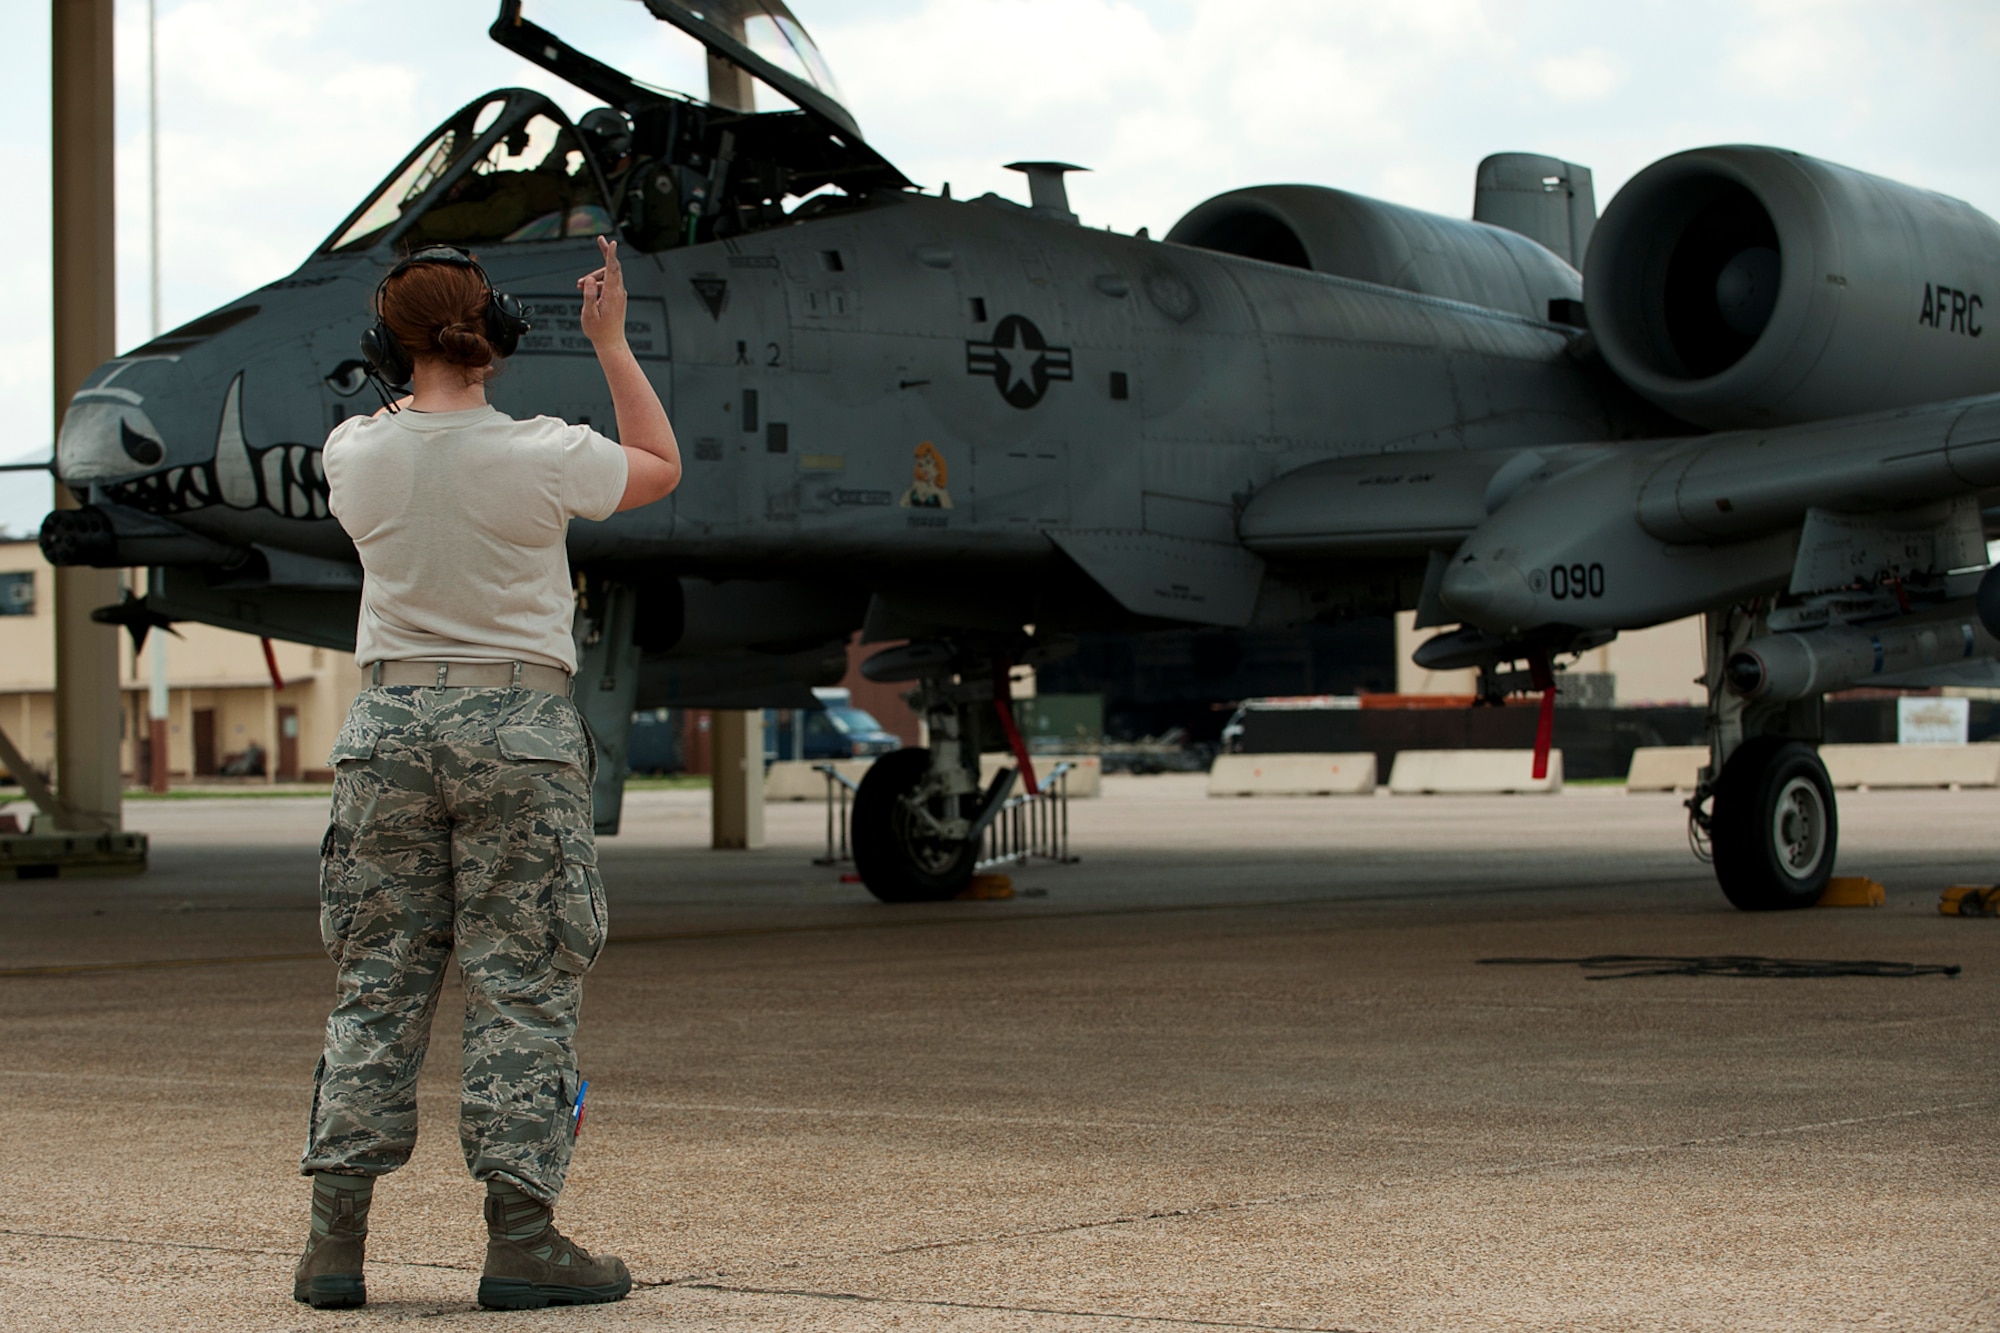 U.S. Air Force Senior Airman Kari Ferolito, 917th Aircraft Maintenance Squadron crew chief, marshals an A-10 Thunderbolt II from its parking spot for a sortie in support of the Patriot Saint exercise, Barksdale Air Force Base, La., May 16, 2012. The A-10 is assigned to the 47th Fighter Squadron, 917th Fighter Group, and conducted combat search and rescue during the exercise. (U.S. Air Force photo by Master Sgt. Greg Steele/Released)